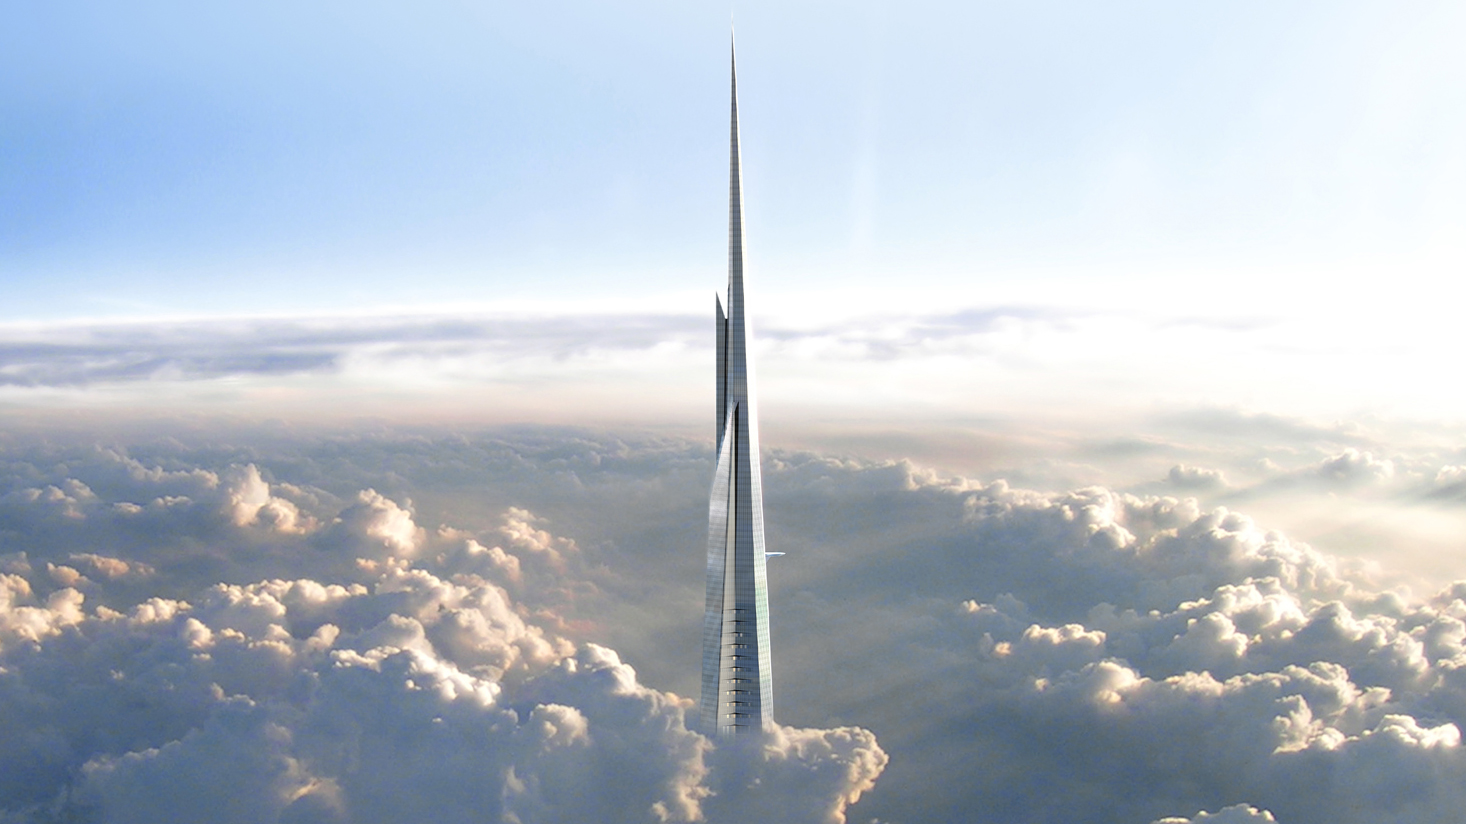 Jeddah Tower, the Soon-To-Be Tallest Building in the World 